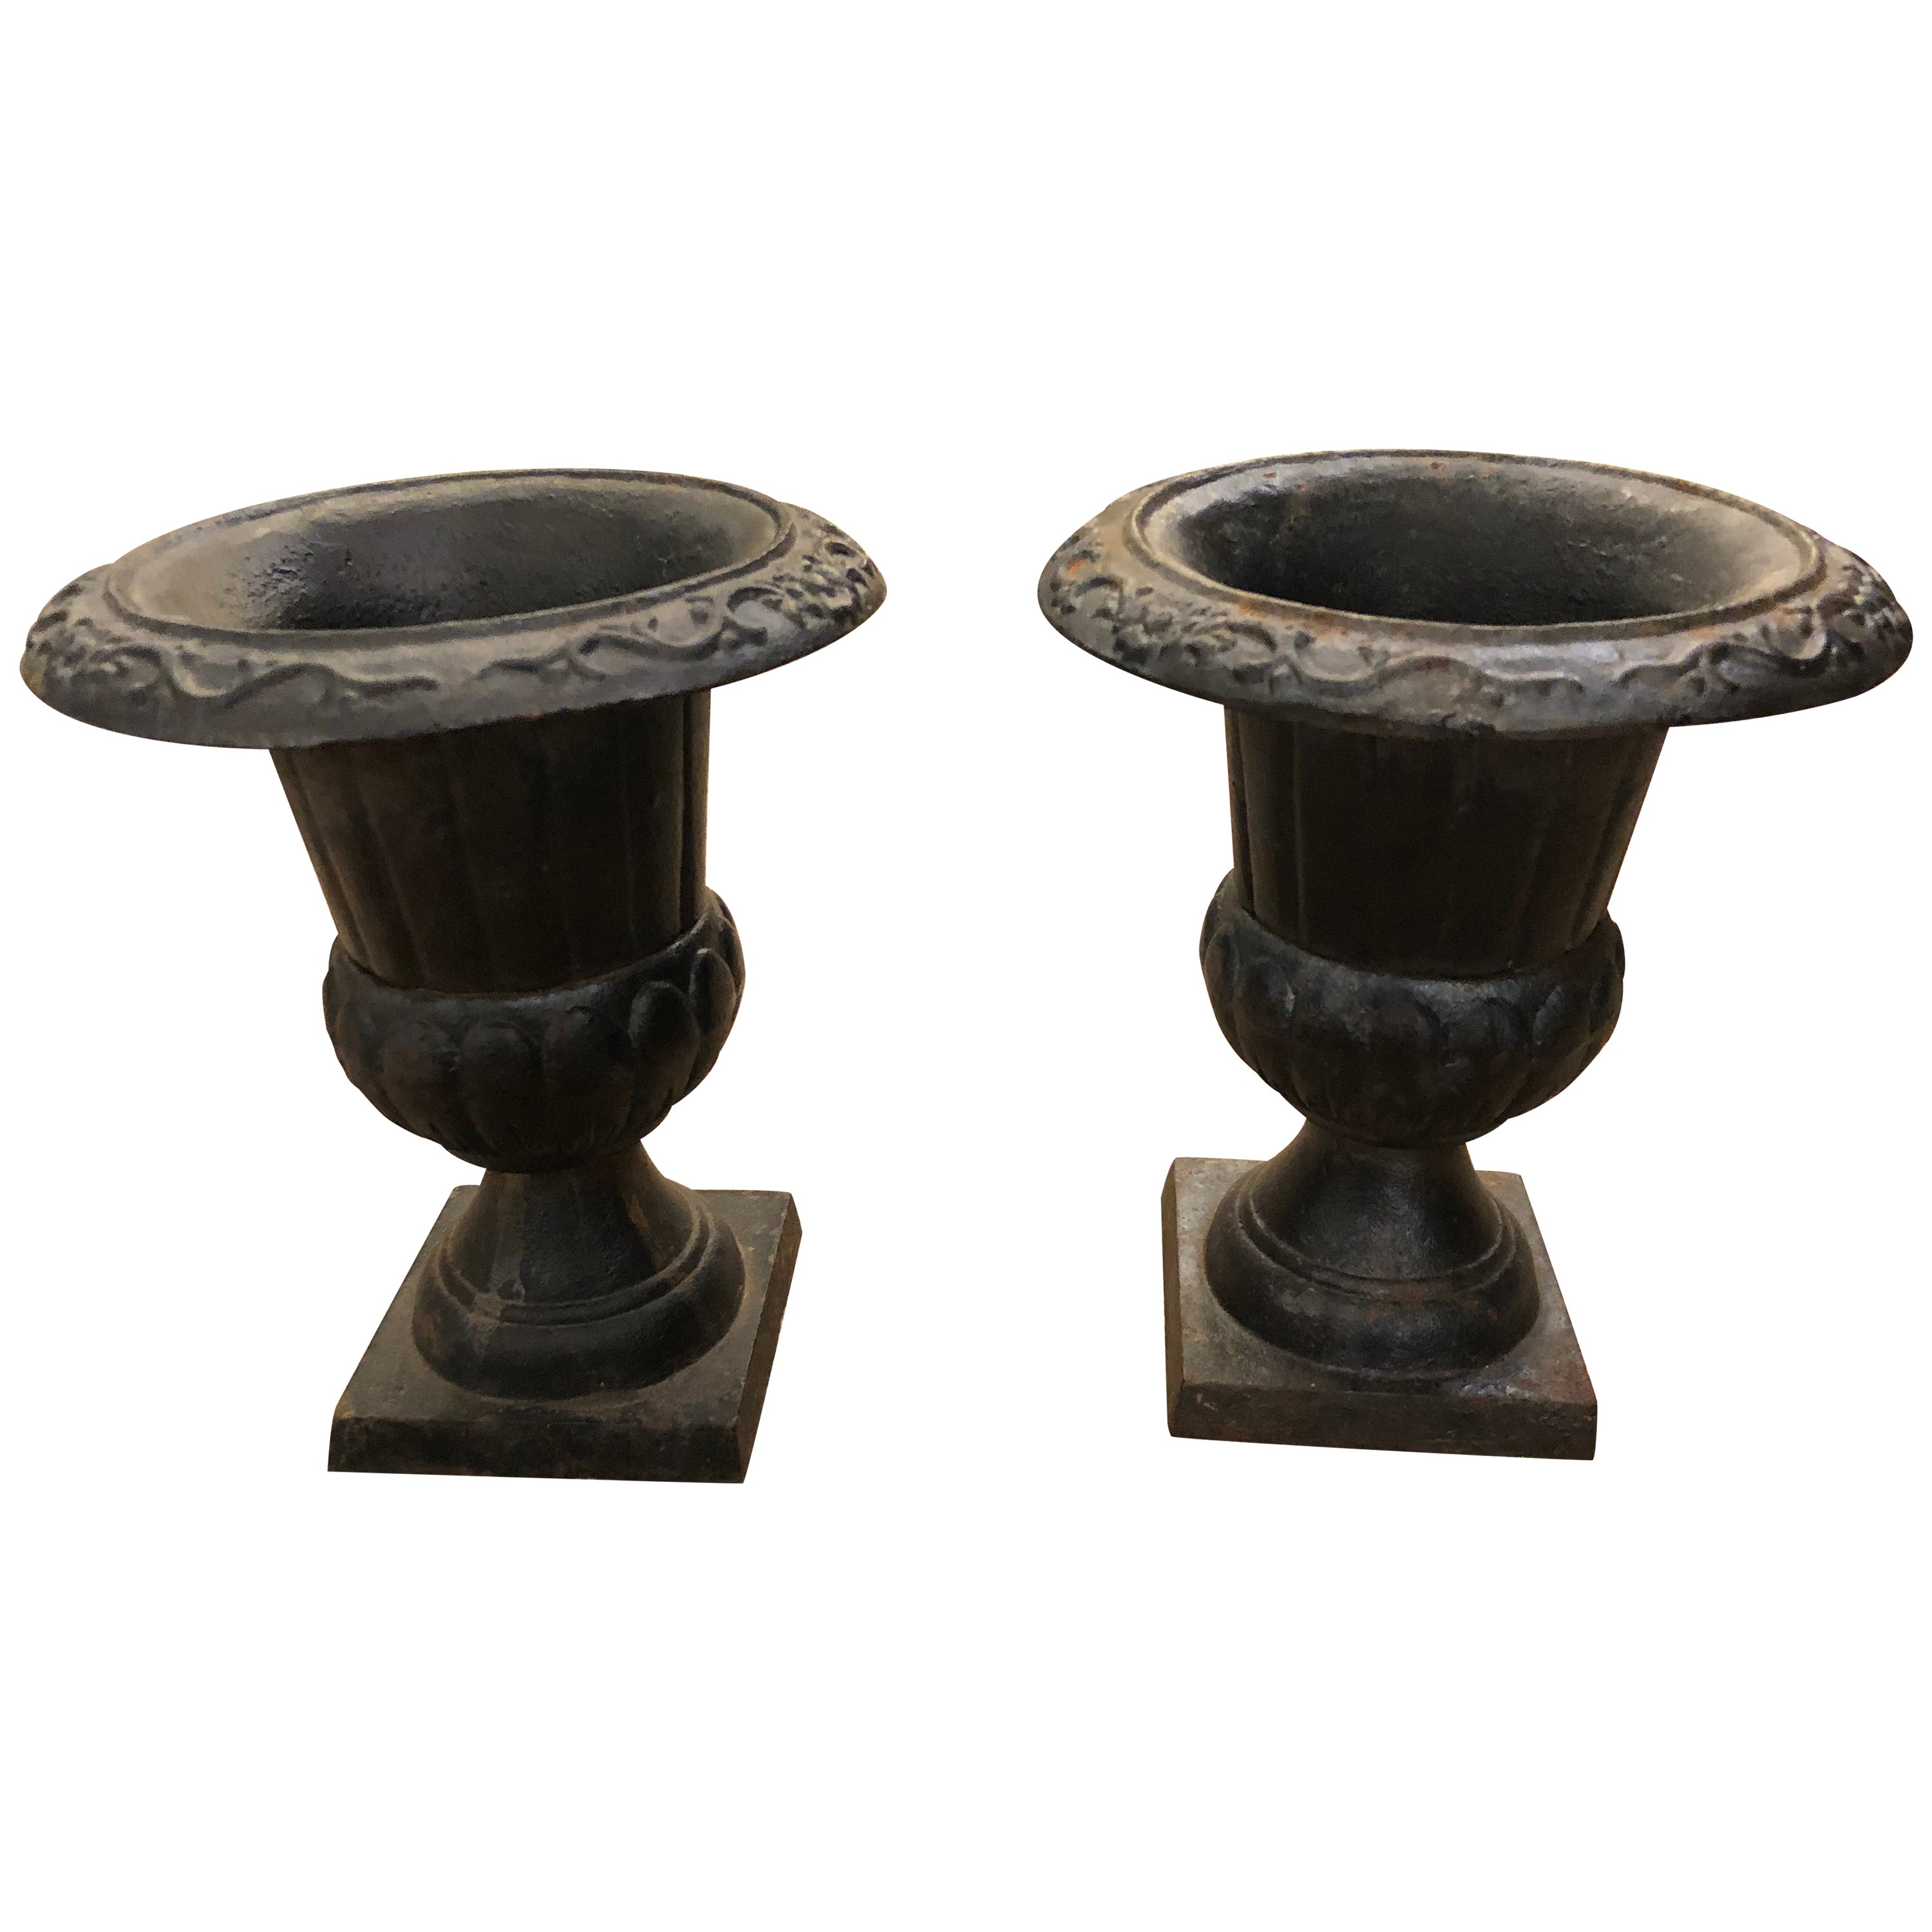 Charming Little Pair of Black Iron Urns For Sale